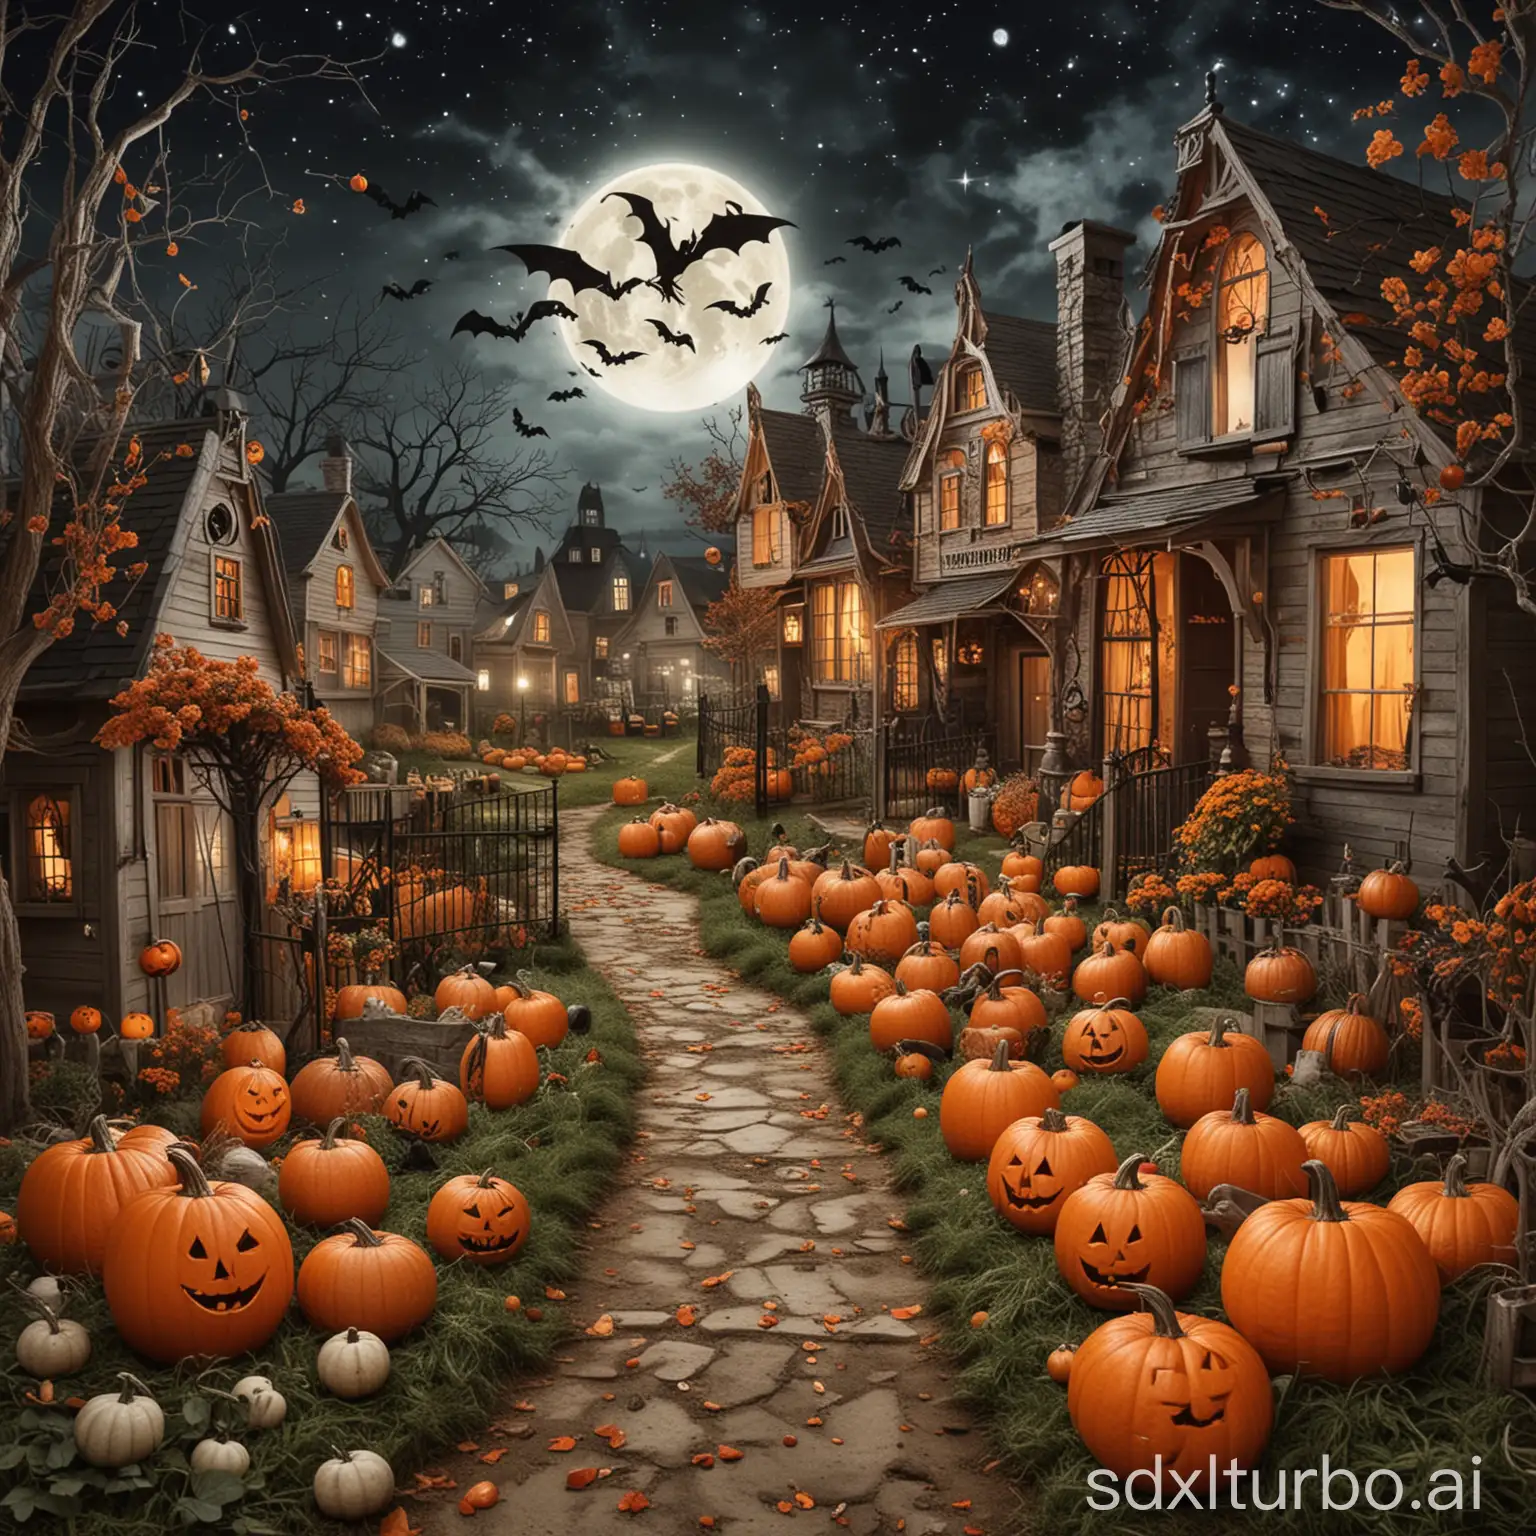 Blend Halloween with another theme: Combine Halloween elements with a different theme, such as a space-themed pumpkin patch or a superhero ghost.